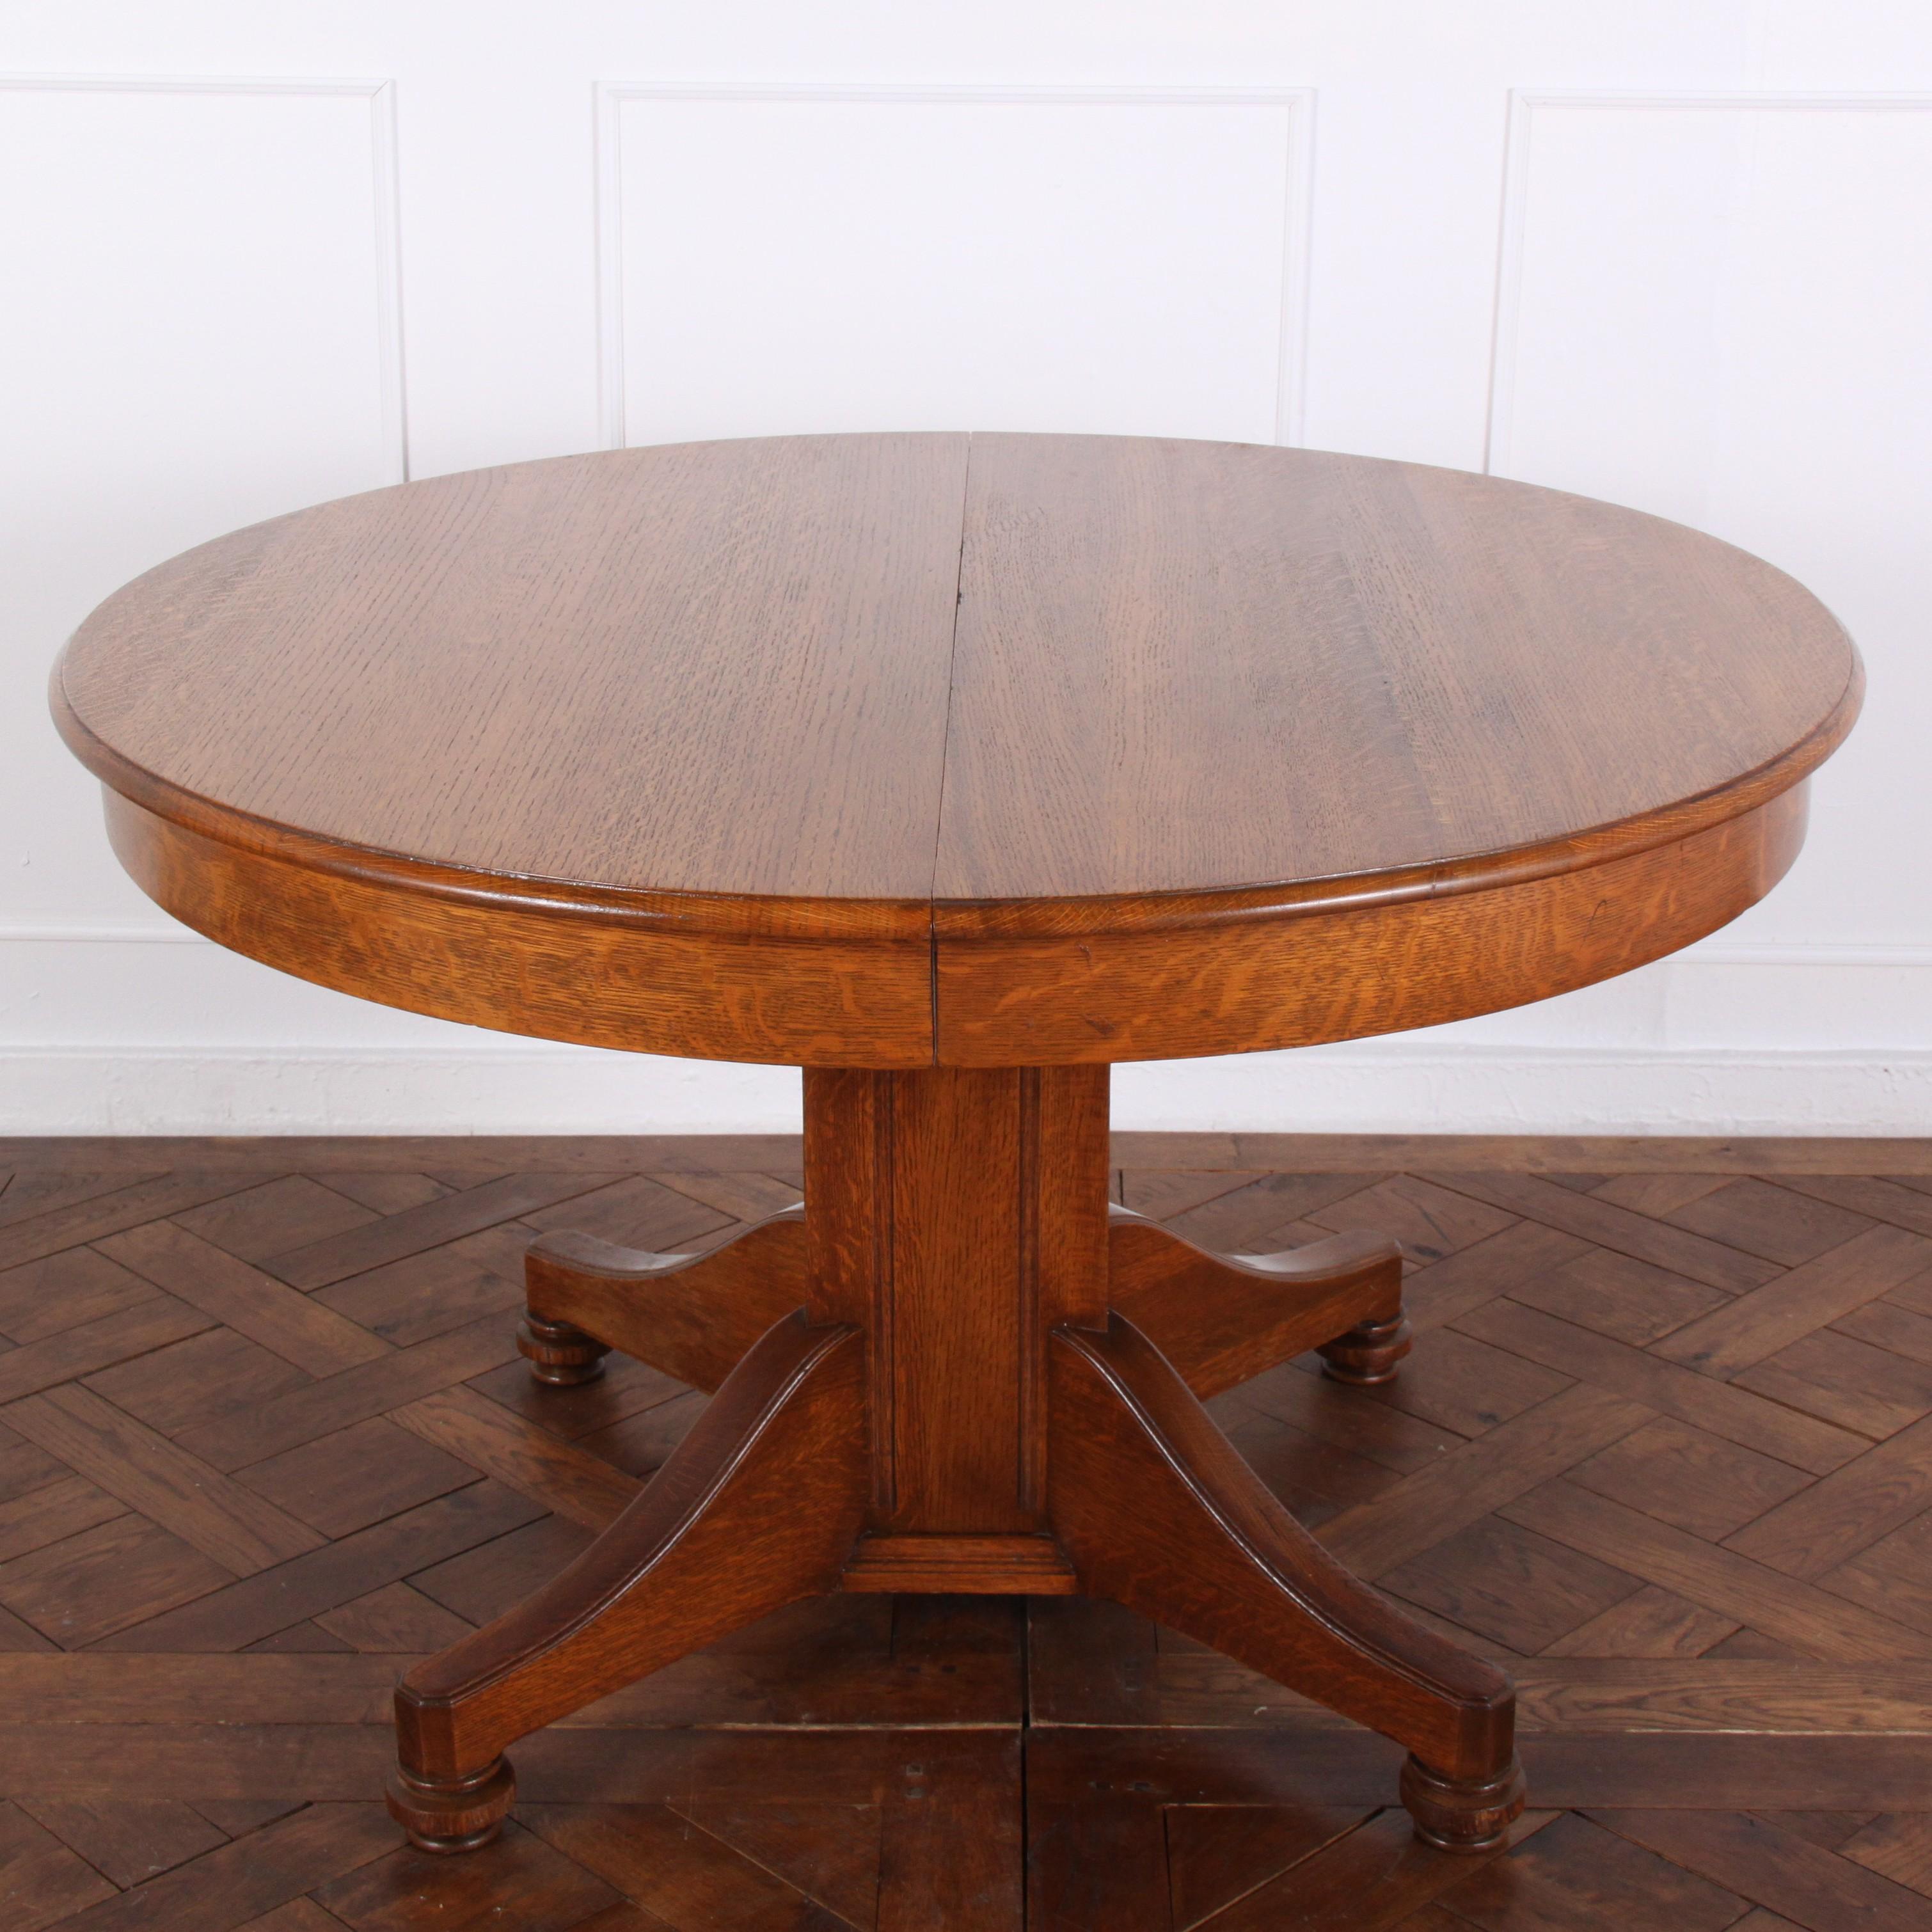 Solid quarter-sawn oak North American-made round Arts & Crafts pedestal dining table with three leaves.
Measures: 45